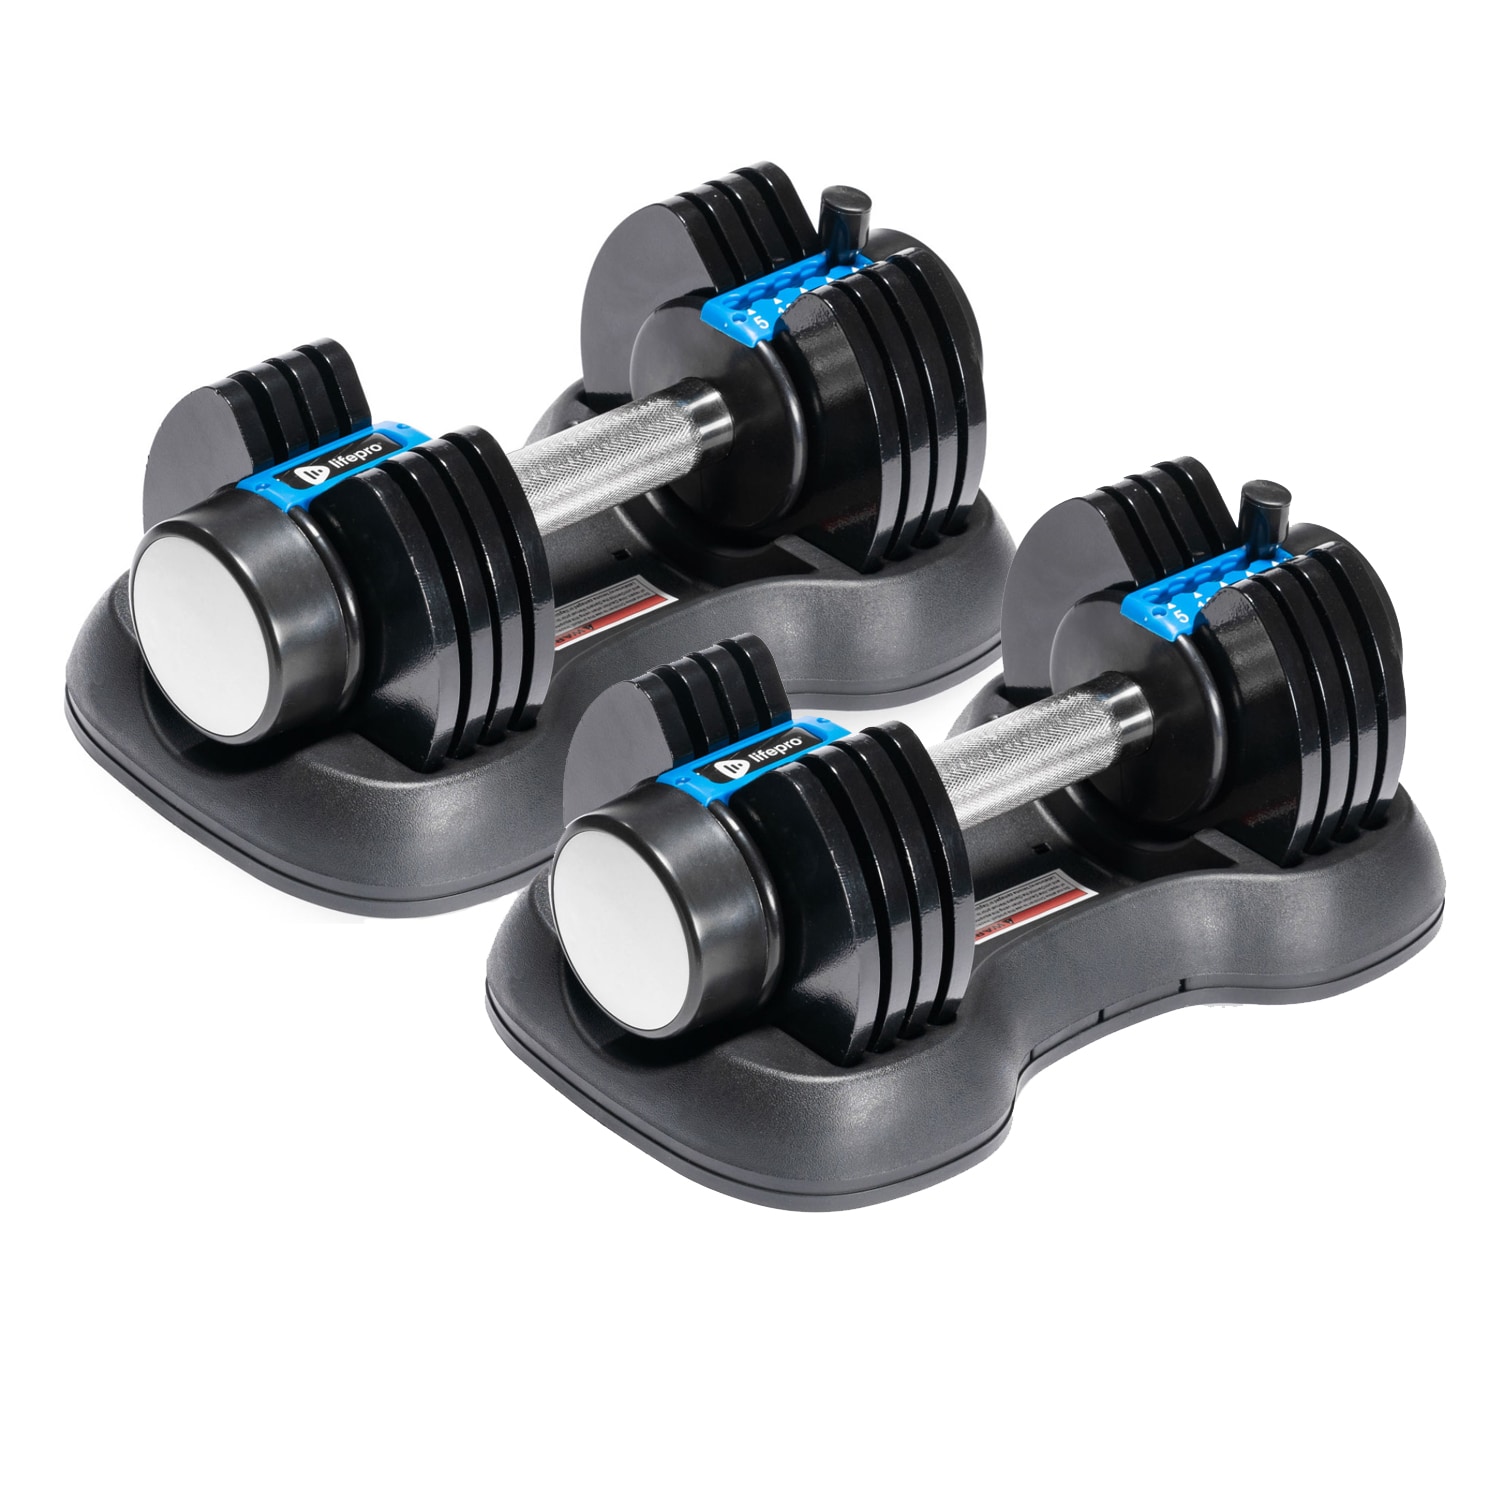 Details about   Empty New Weight Dumbbell Set Adjustable Gym Barbell Plates Body Workout 